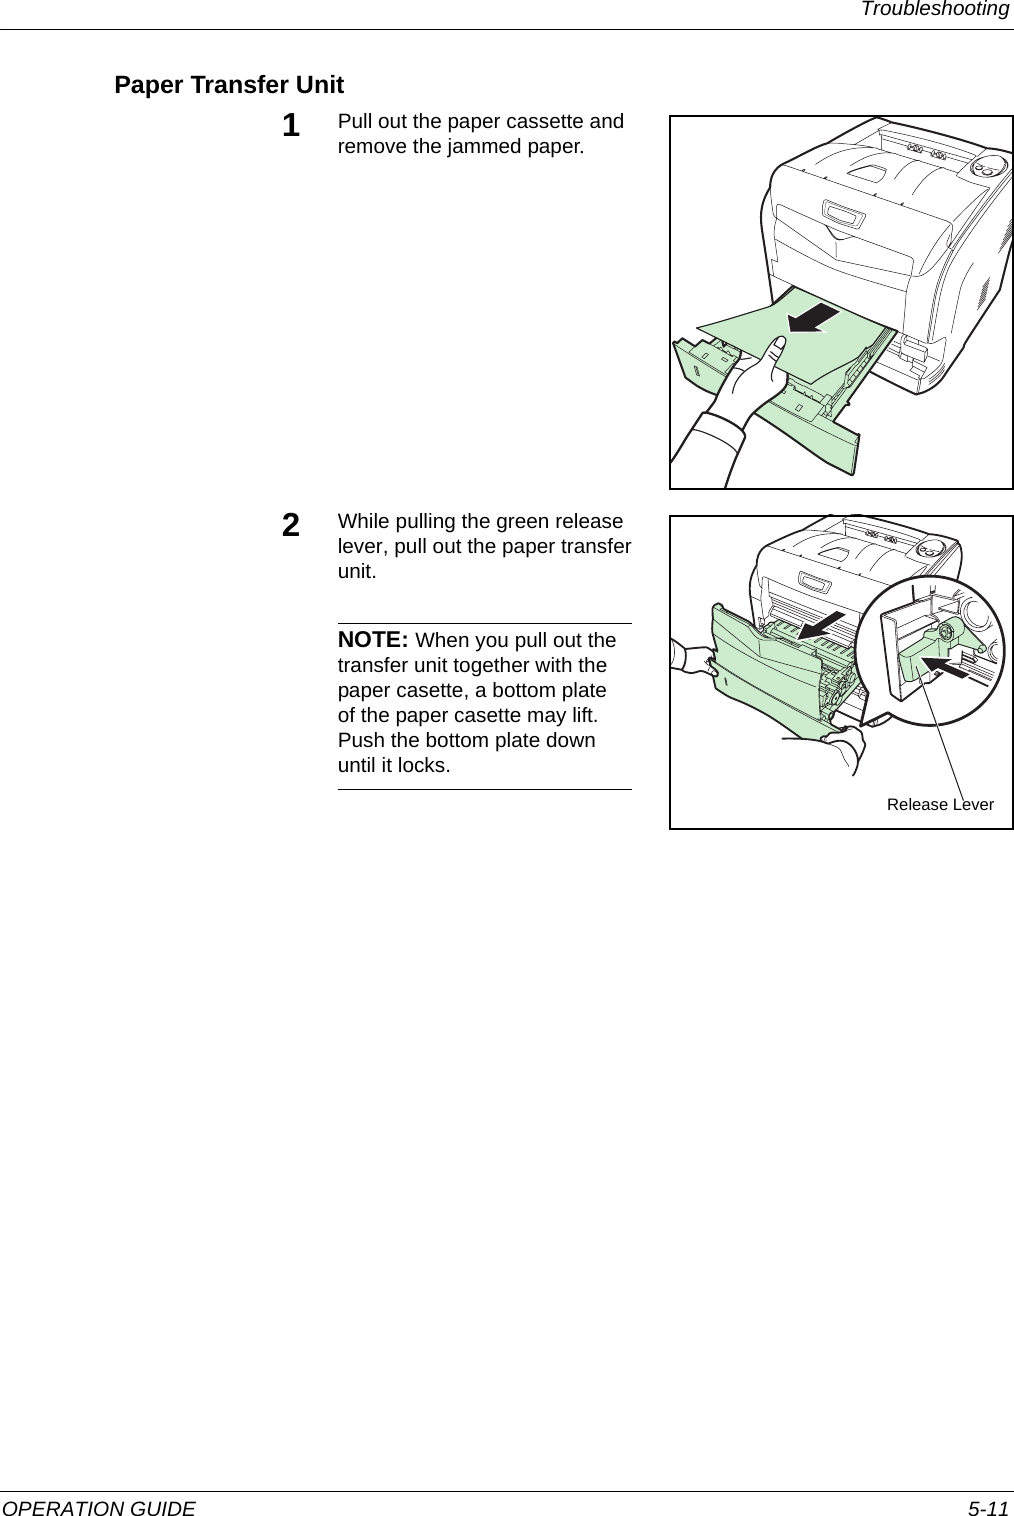 Troubleshooting OPERATION GUIDE 5-11Paper Transfer Unit1Pull out the paper cassette and remove the jammed paper. 2While pulling the green release lever, pull out the paper transfer unit.NOTE: When you pull out the transfer unit together with the paper casette, a bottom plate of the paper casette may lift. Push the bottom plate down until it locks.Release Lever